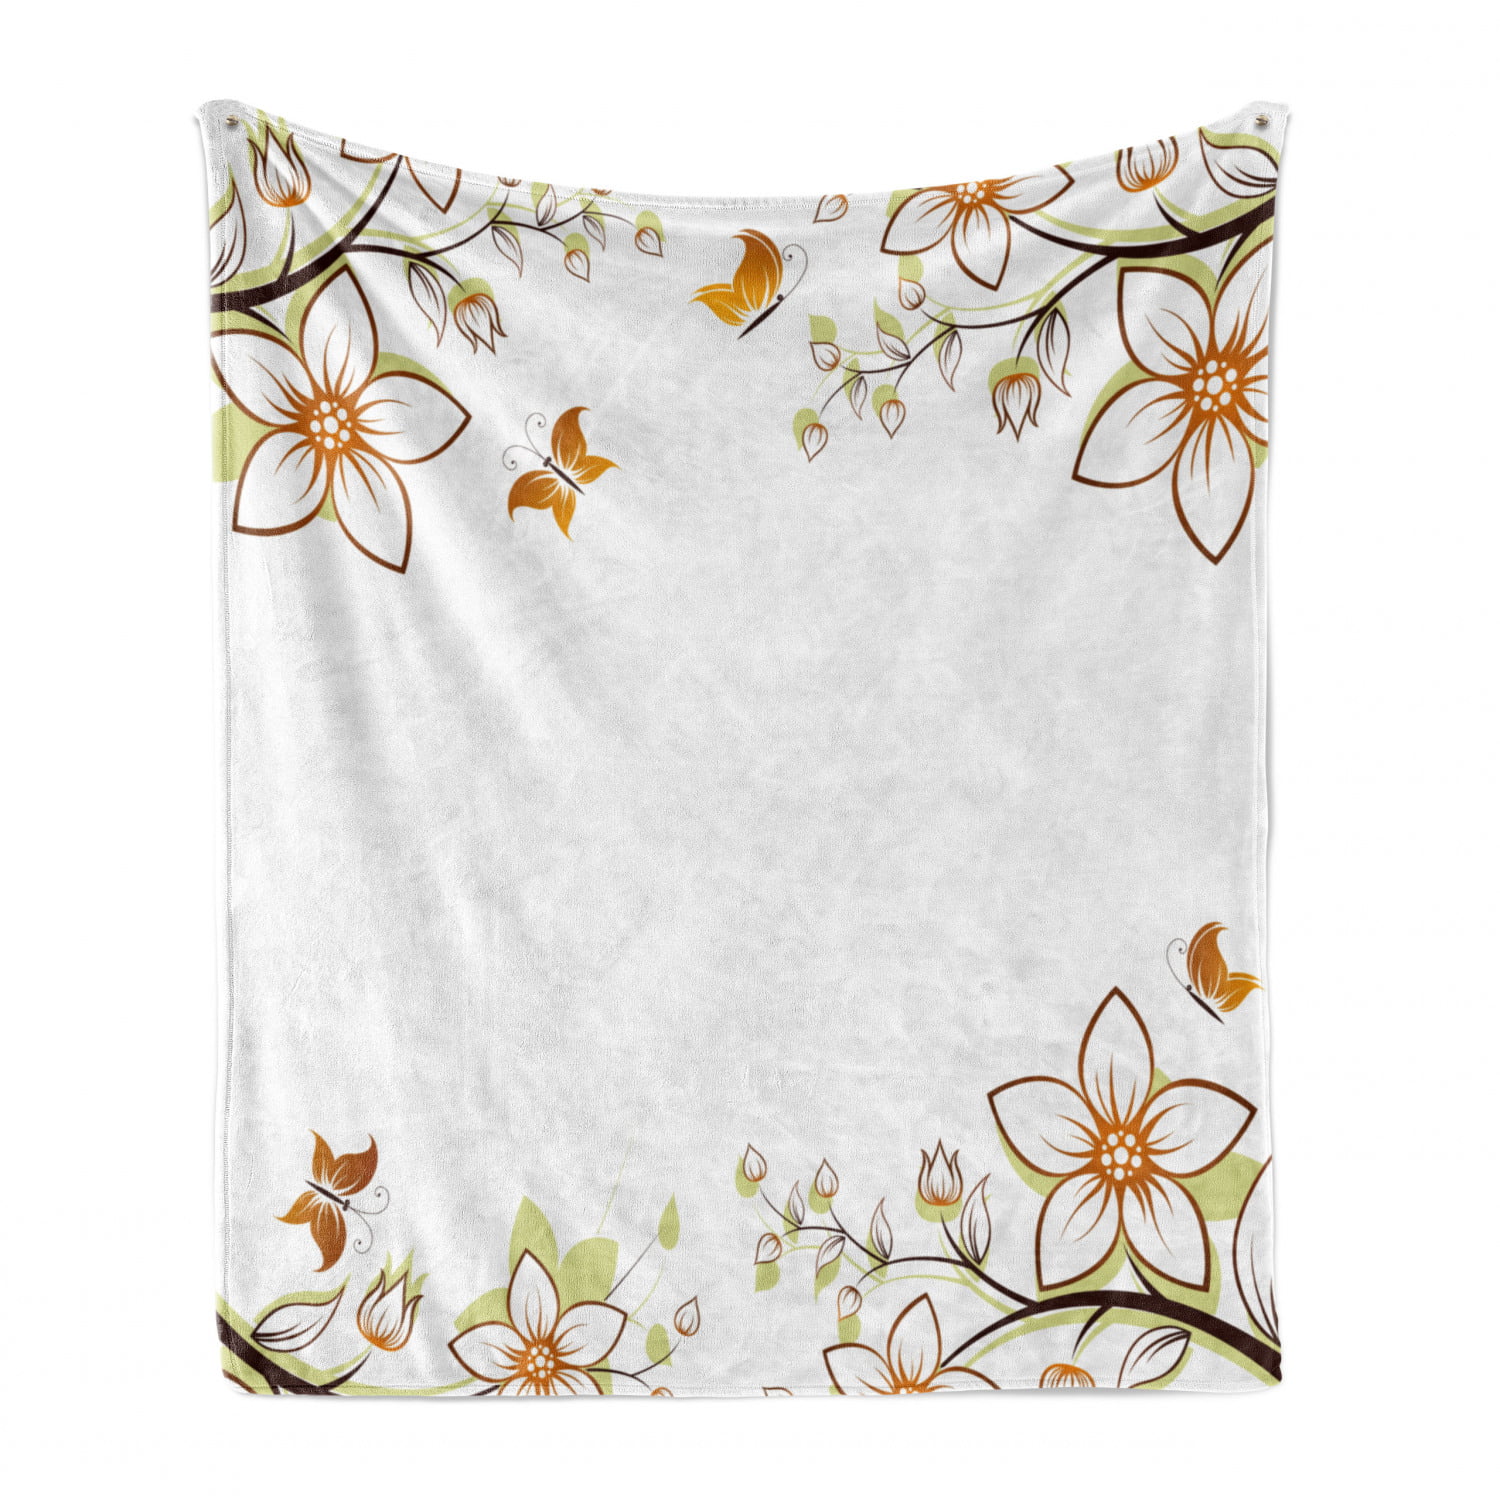 Akdeps Floral Pattern with Butterflues Leaves and Plants Soft Aldult Throw Blanket Comfort Flannel Fleece Throw Blanket for Everyone 50x60 